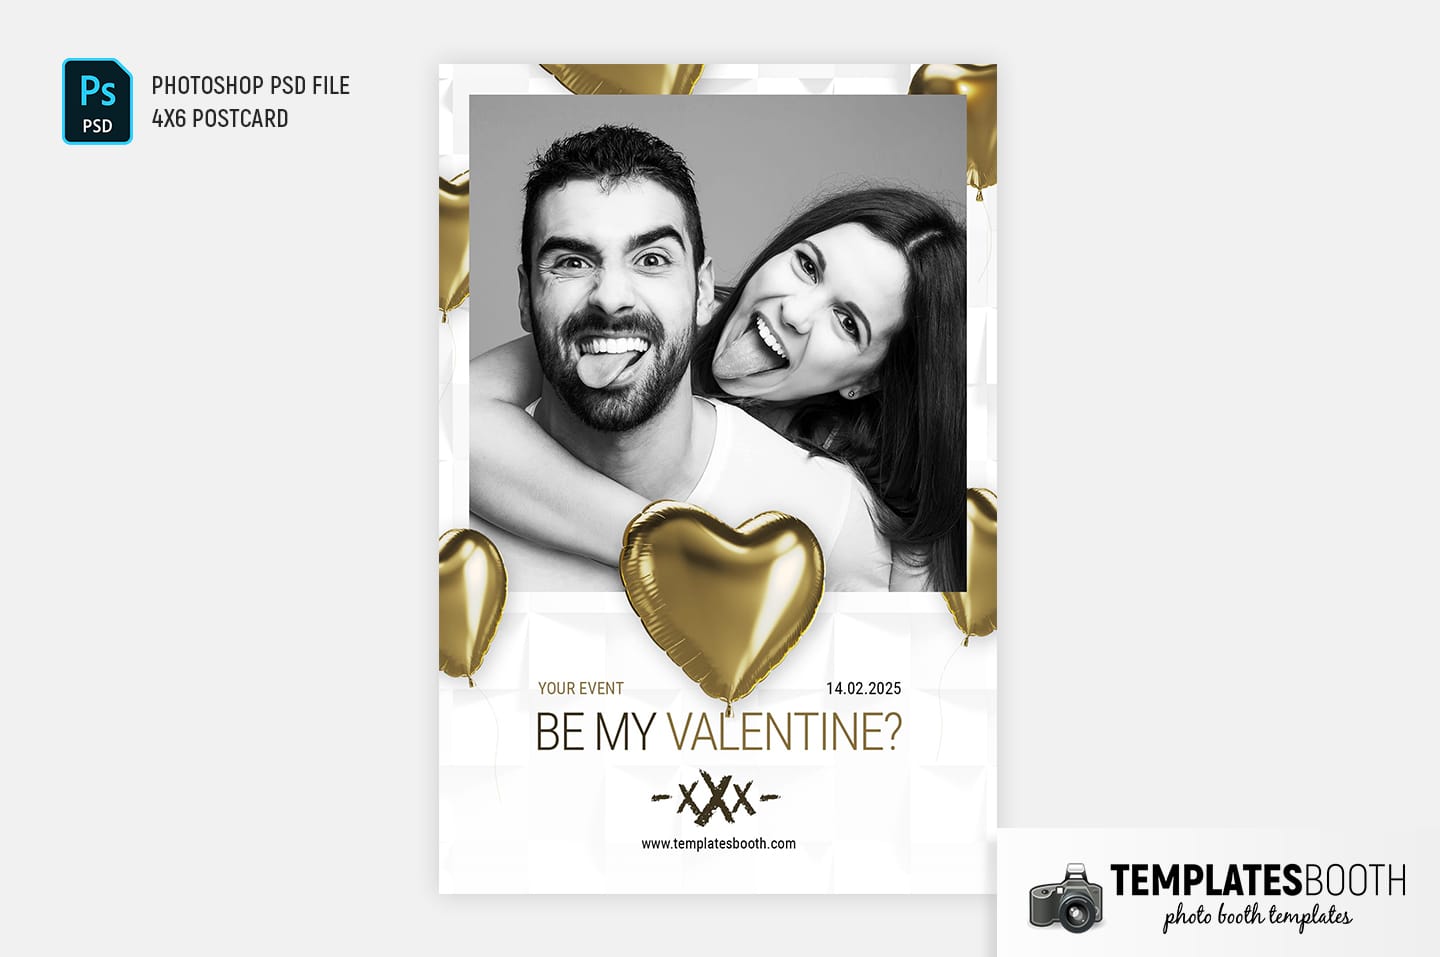 Be My Valentine Photo Booth Template (4x6 portrait)